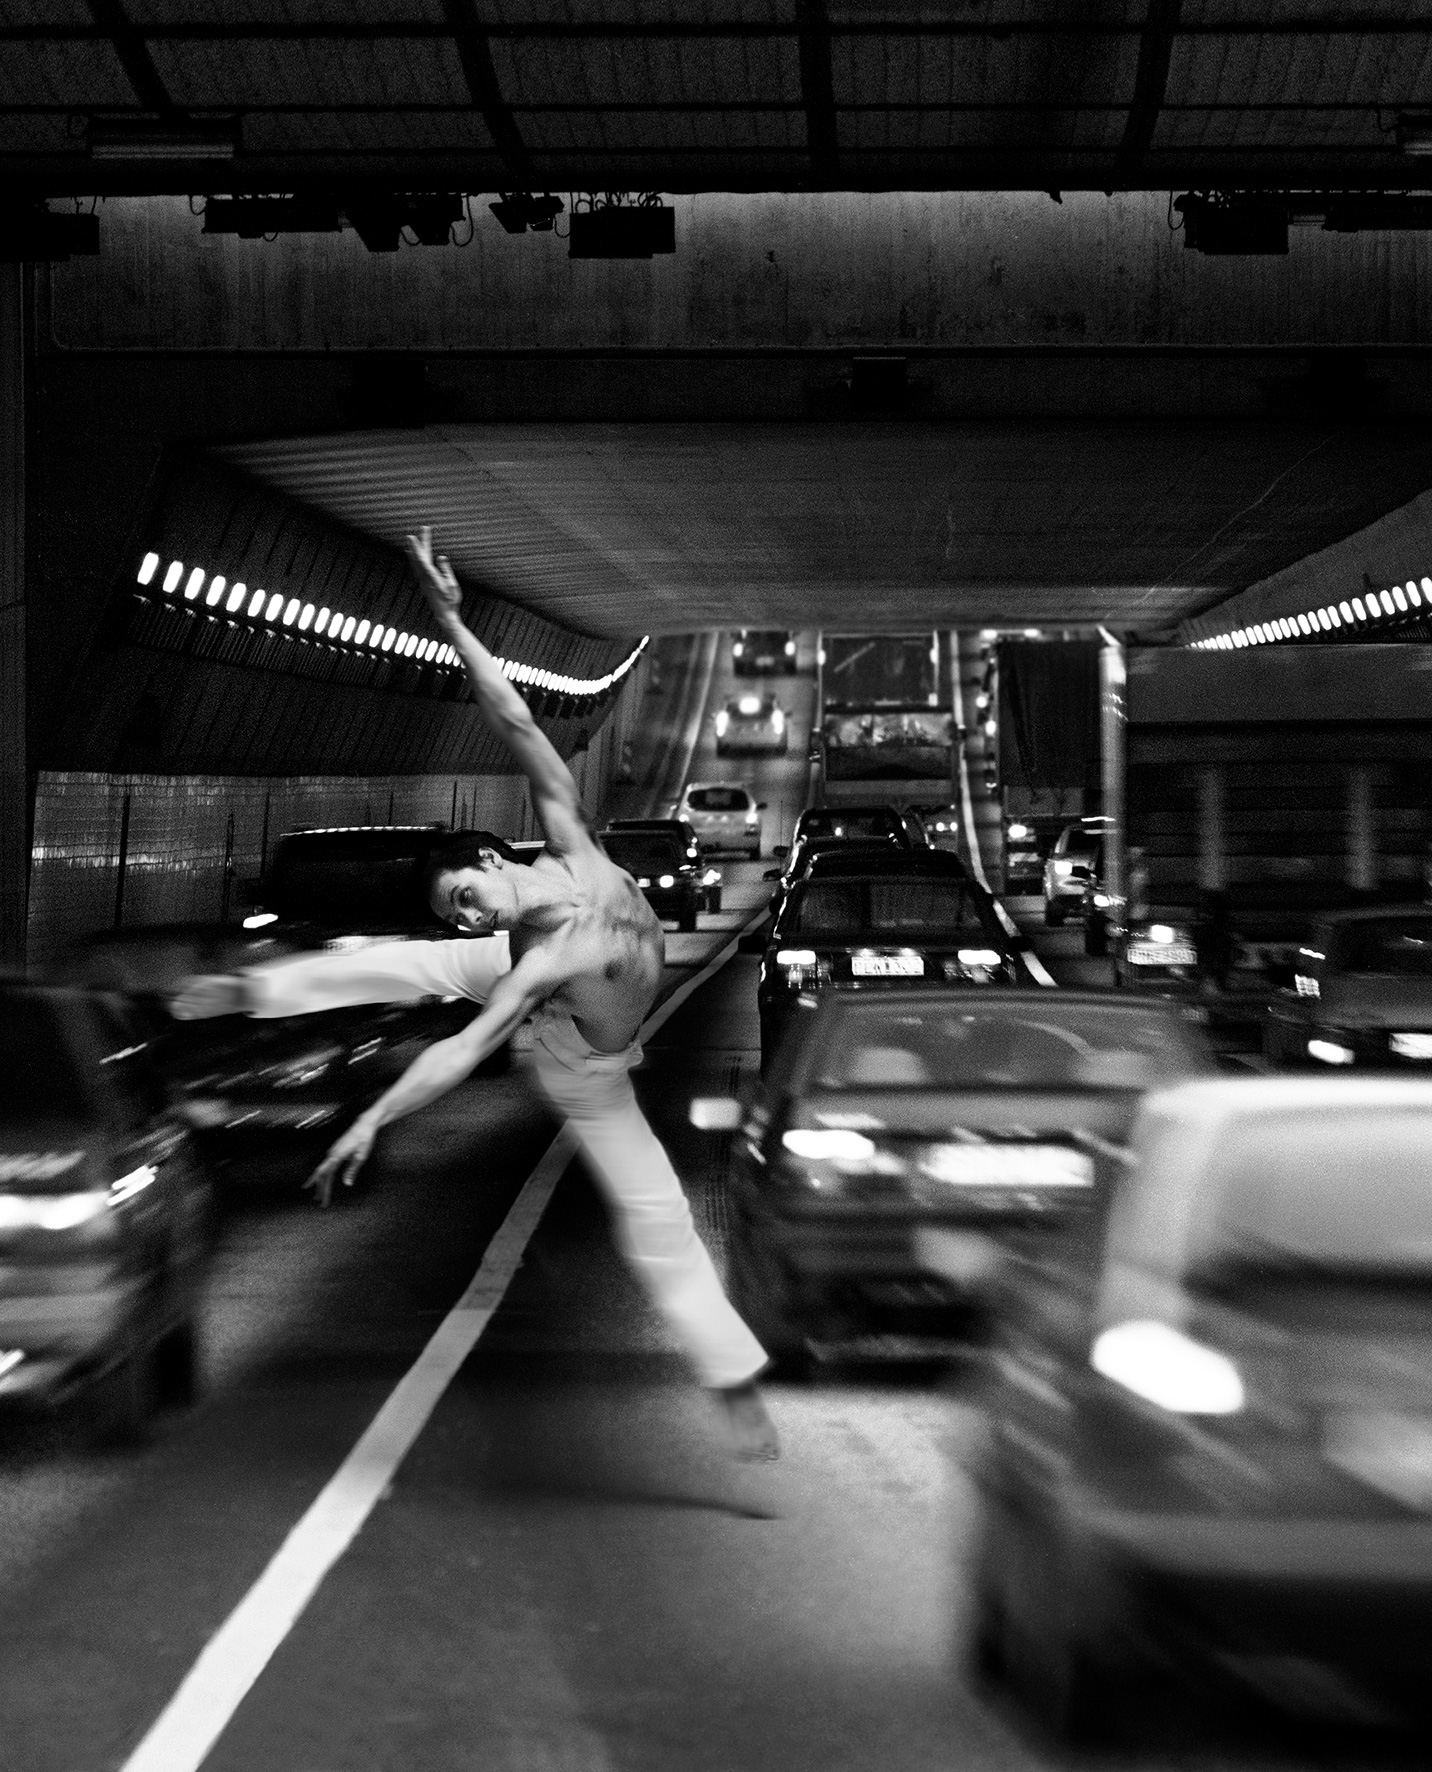 A person dancing in the middle of a busy road in the Tingstad Tunnel, Gothenburg. It's in black and white, capturing a dynamic and dramatic scene. The individual is in the air, seemingly dancing or jumping, and is positioned in the center of the road. Cars are moving around the person, creating a sense of motion and urgency. The tunnel is illuminated by ceiling lights, casting shadows and highlights that amplify the intensity of the moment. The cars are blurry, indicating motion.